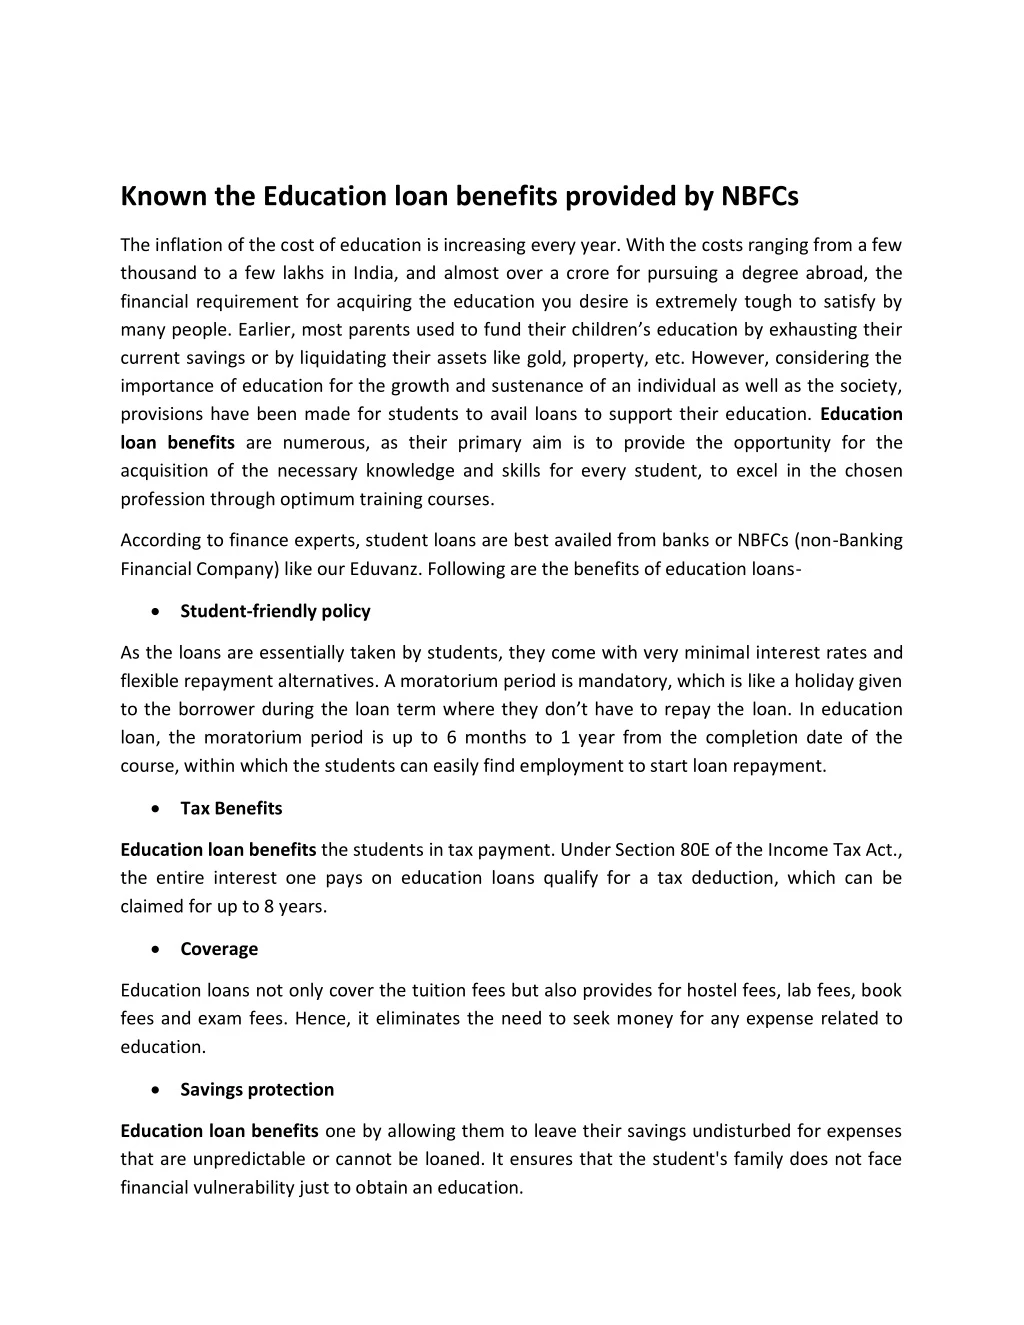 known the education loan benefits provided